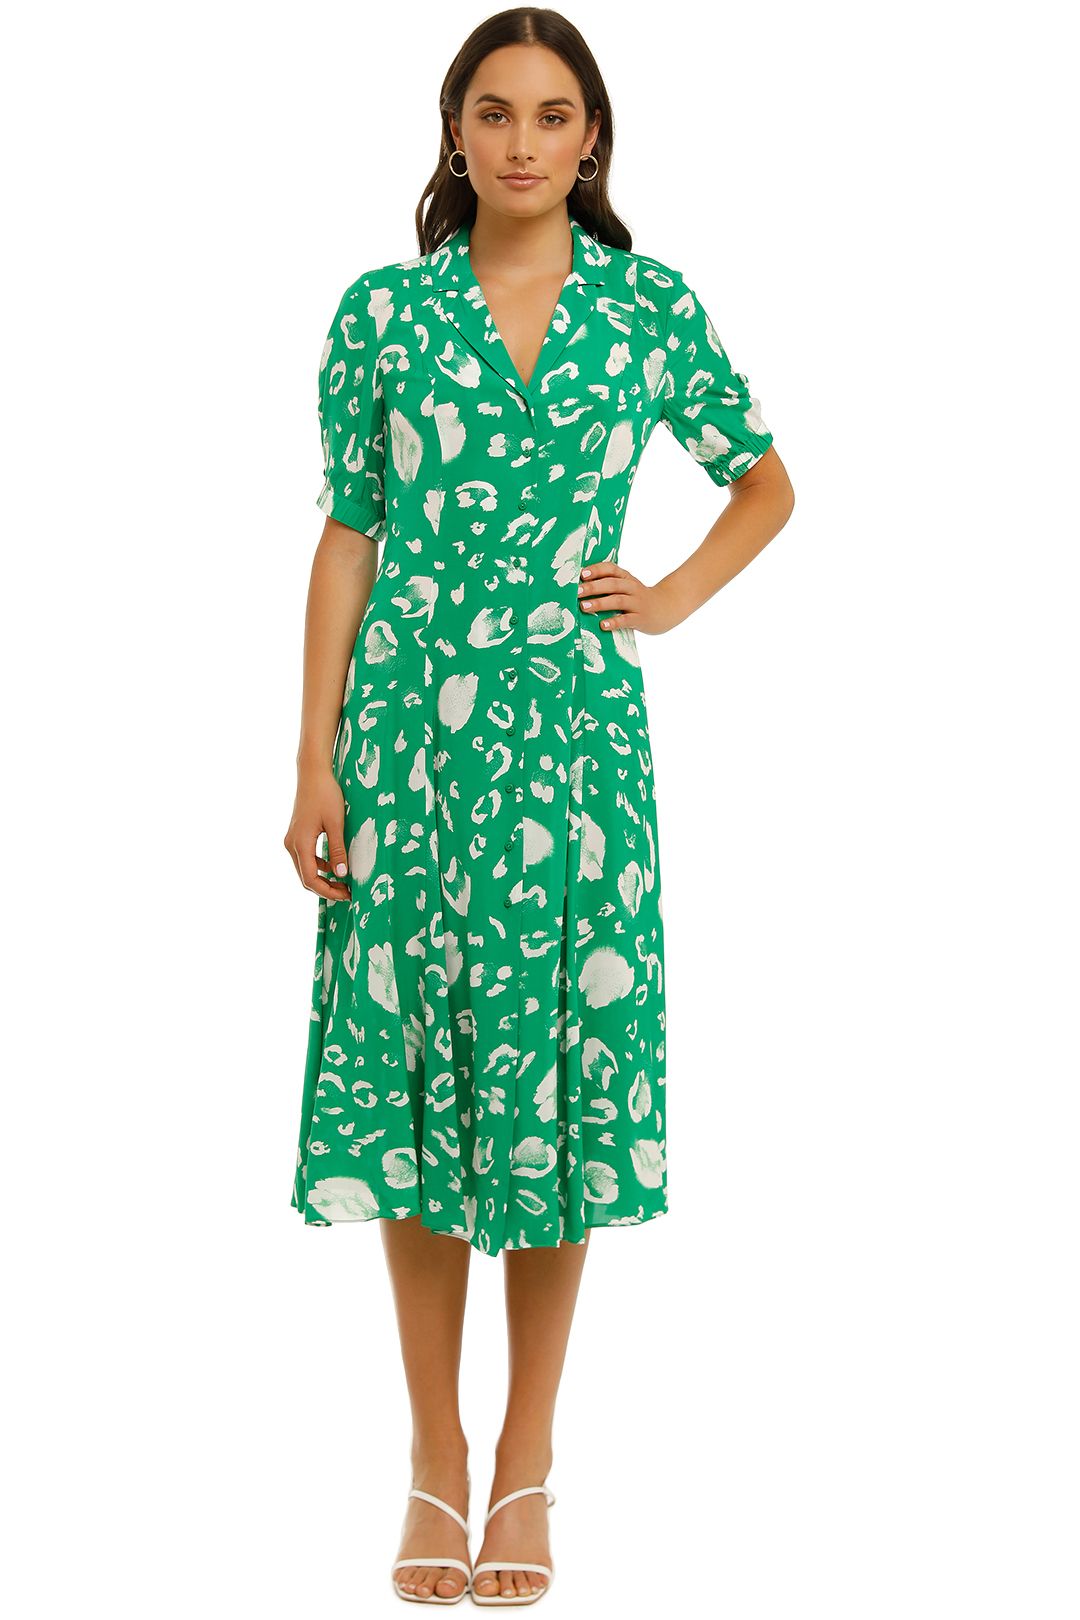 country road green dress